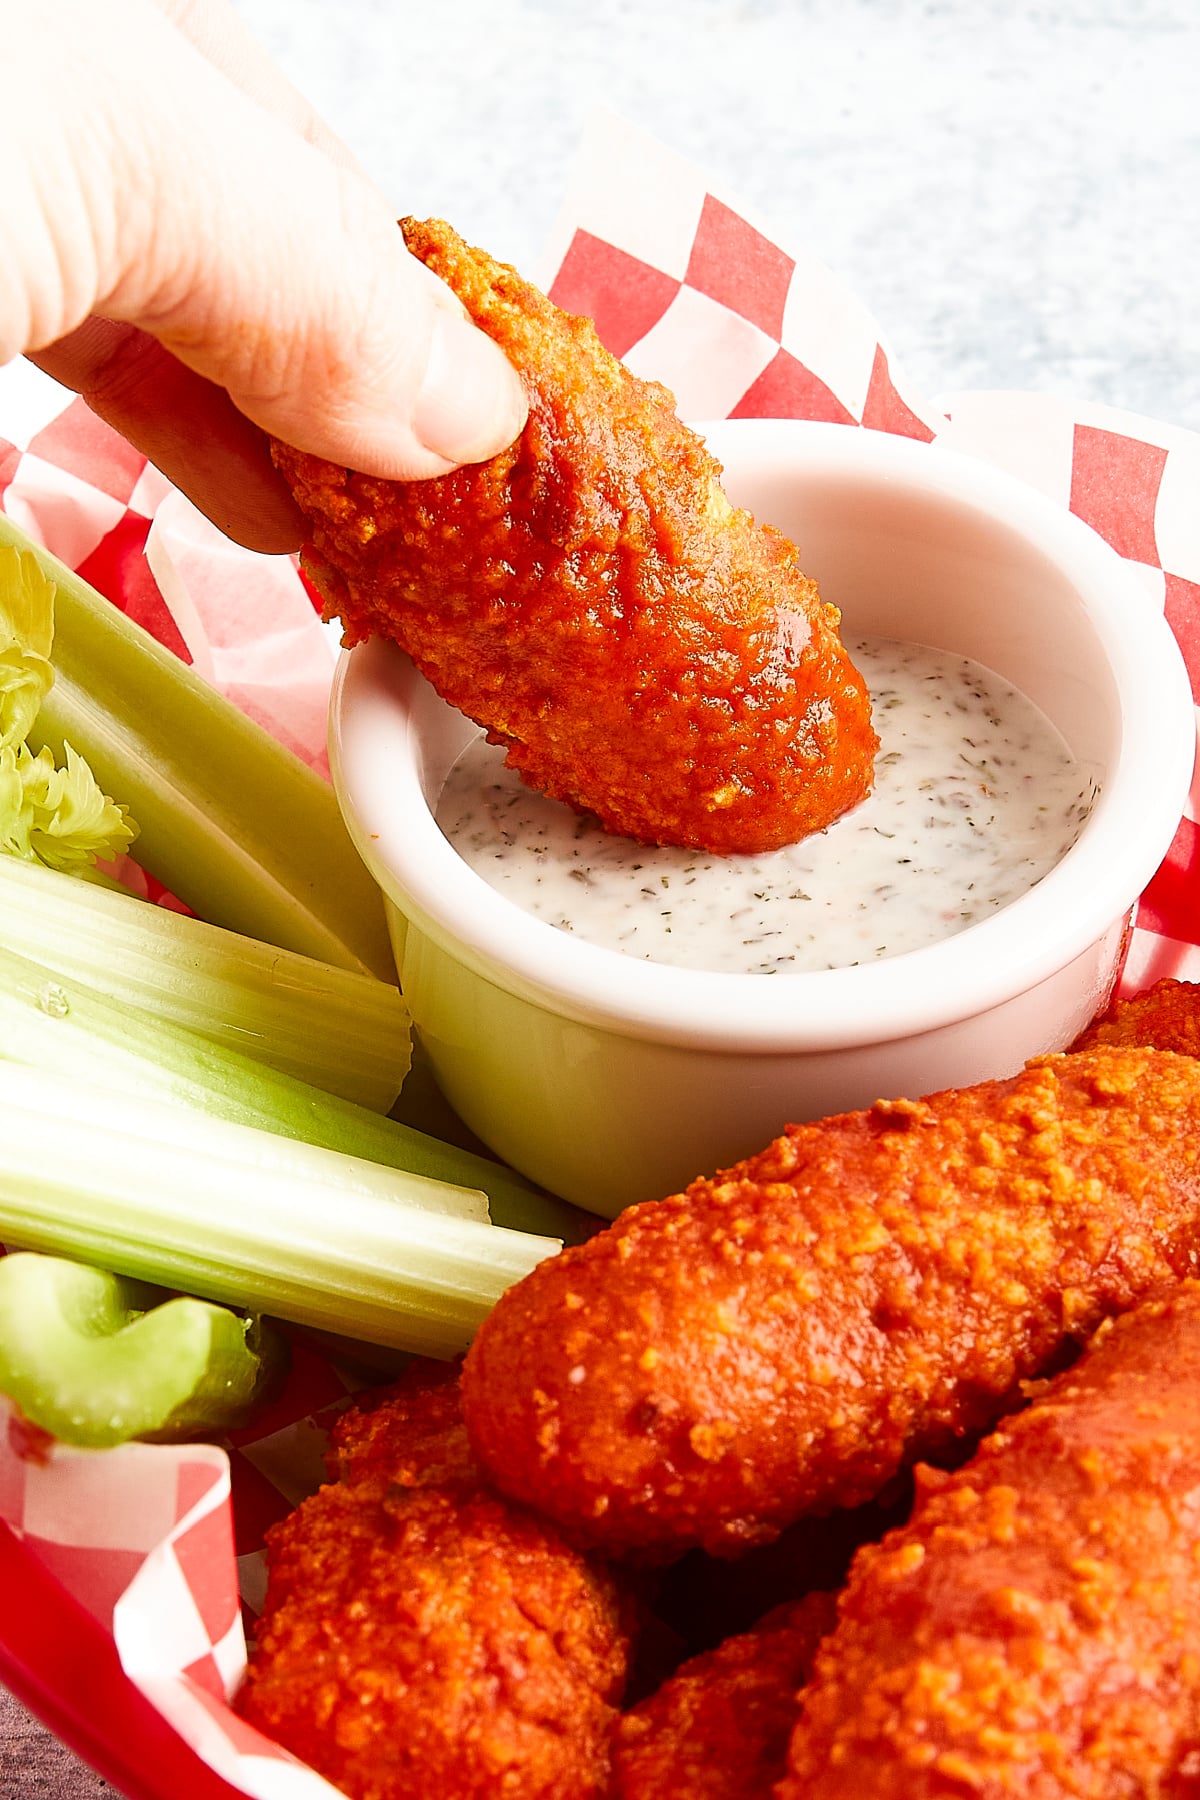 Soy free buffalo wings served in a red plastic basket lined with red and white checkered paper. Celery sticks and a small white bowl of ranch dressing are in the basket with the wings, and a hand is dipping one wing into the ranch.